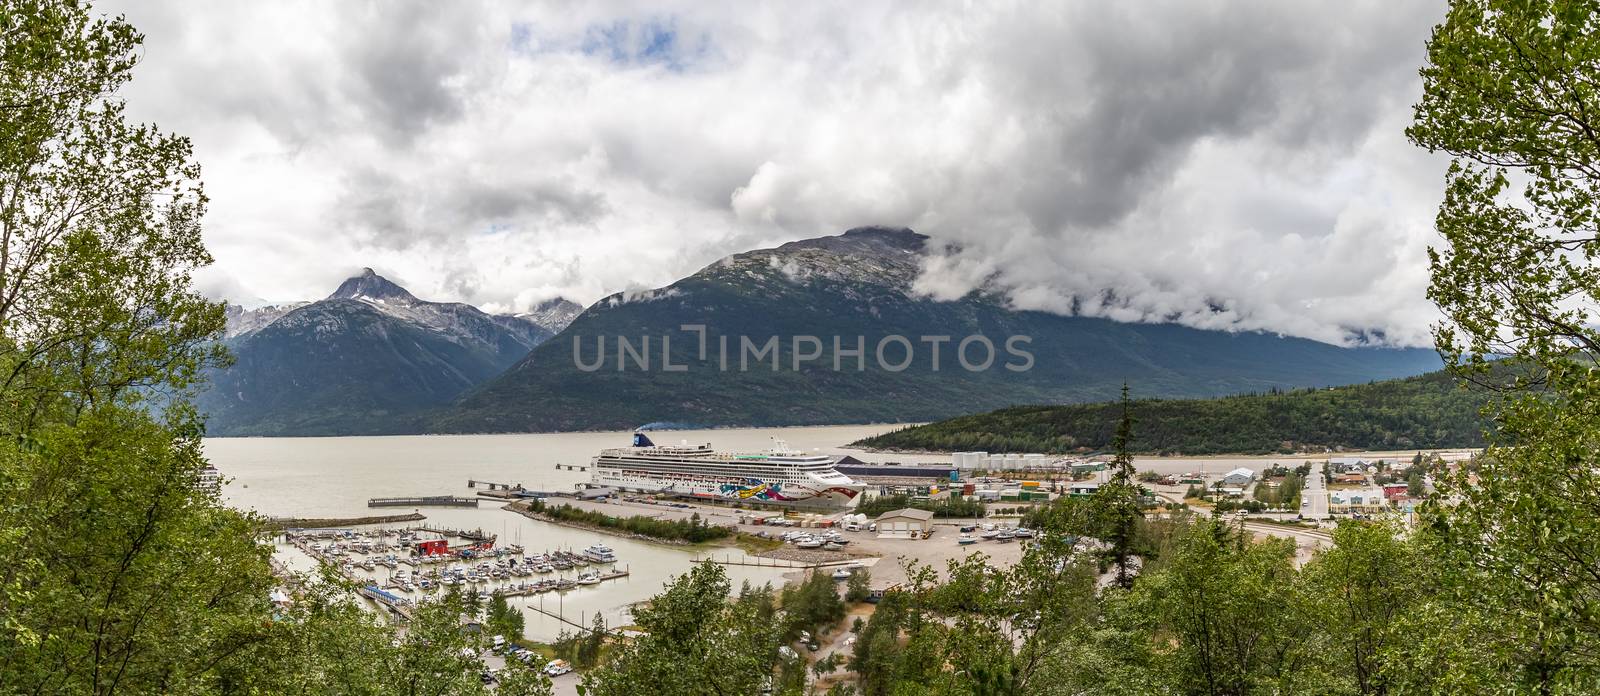 Skagway, Alaska - August 10, 2018: Panoramic view of Skagway port with Norwegian Jewel docked there. Mountains and clouds in the background. Forest in the foreground.